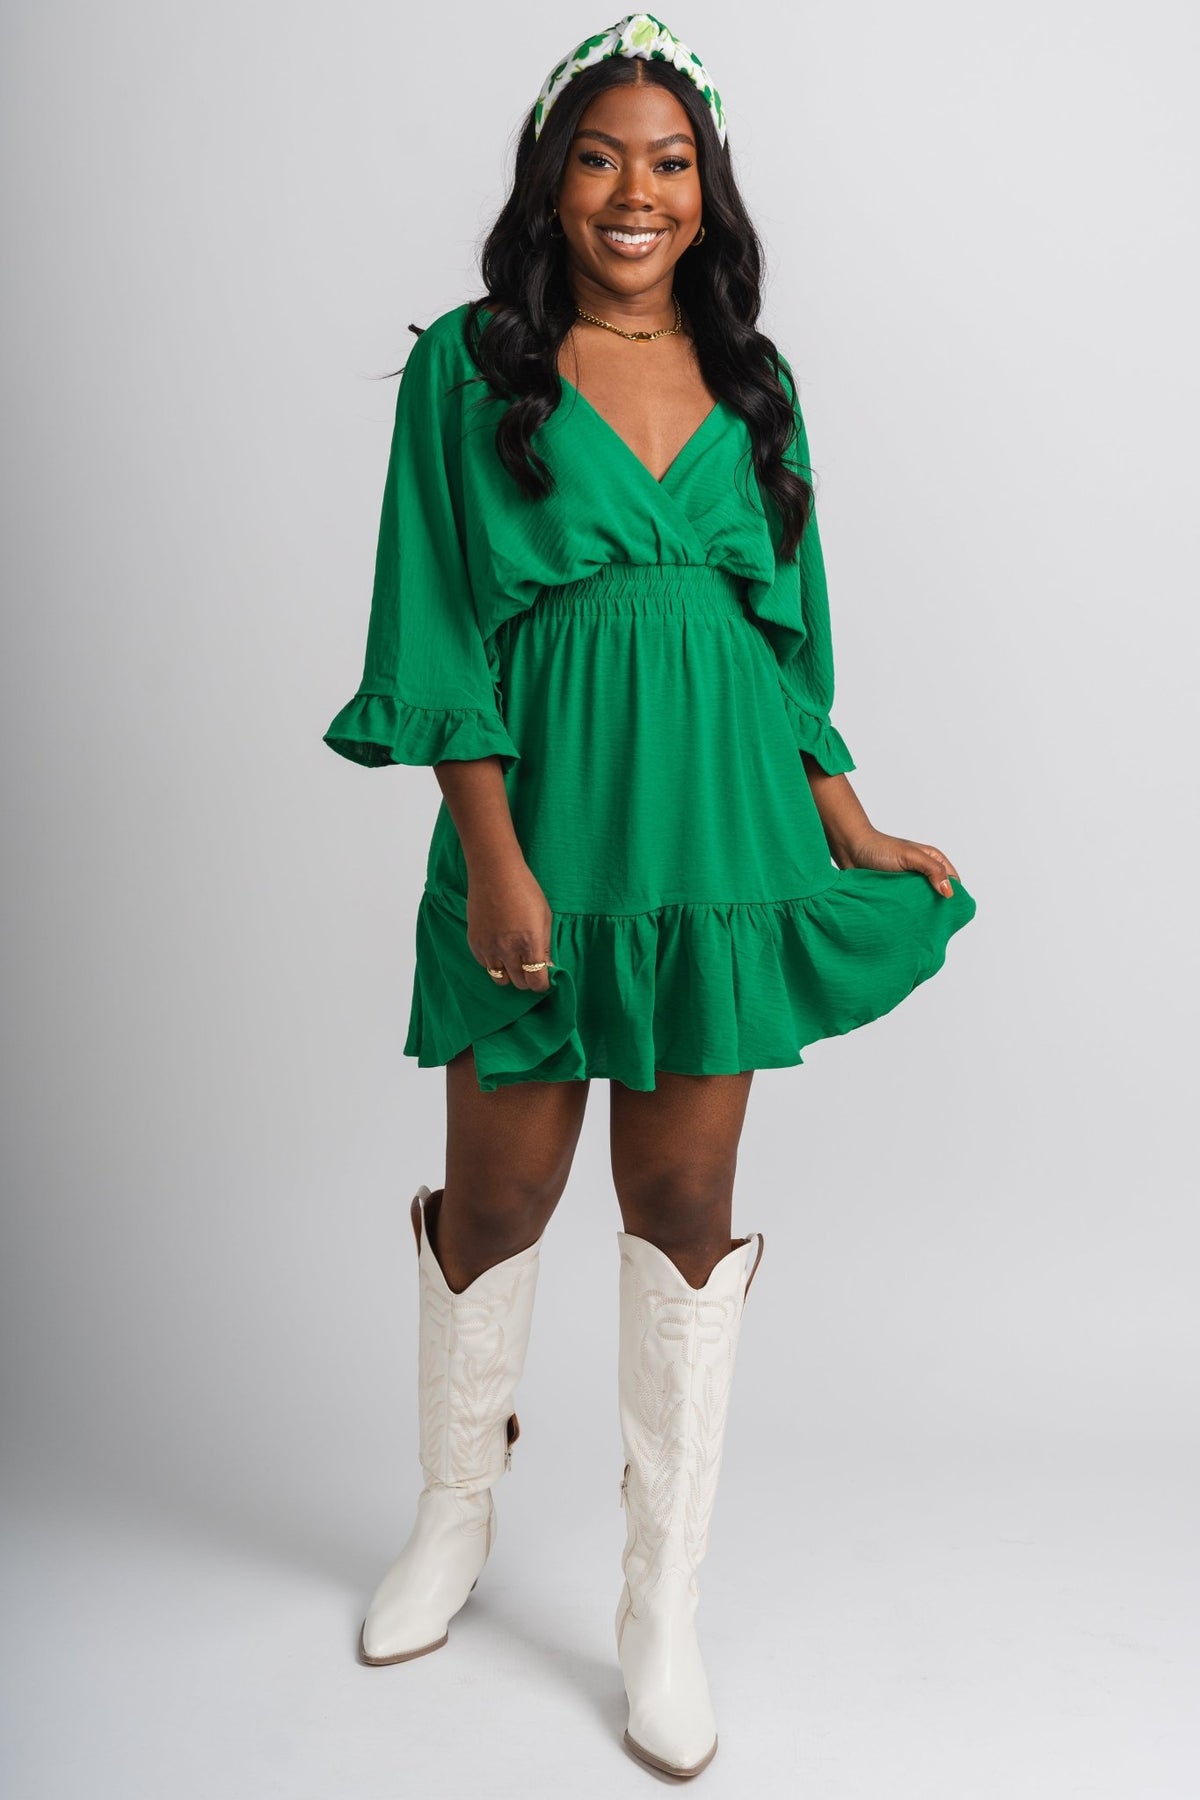 Ruffle sleeve dress green - Cute dress - Trendy Dresses at Lush Fashion Lounge Boutique in Oklahoma City